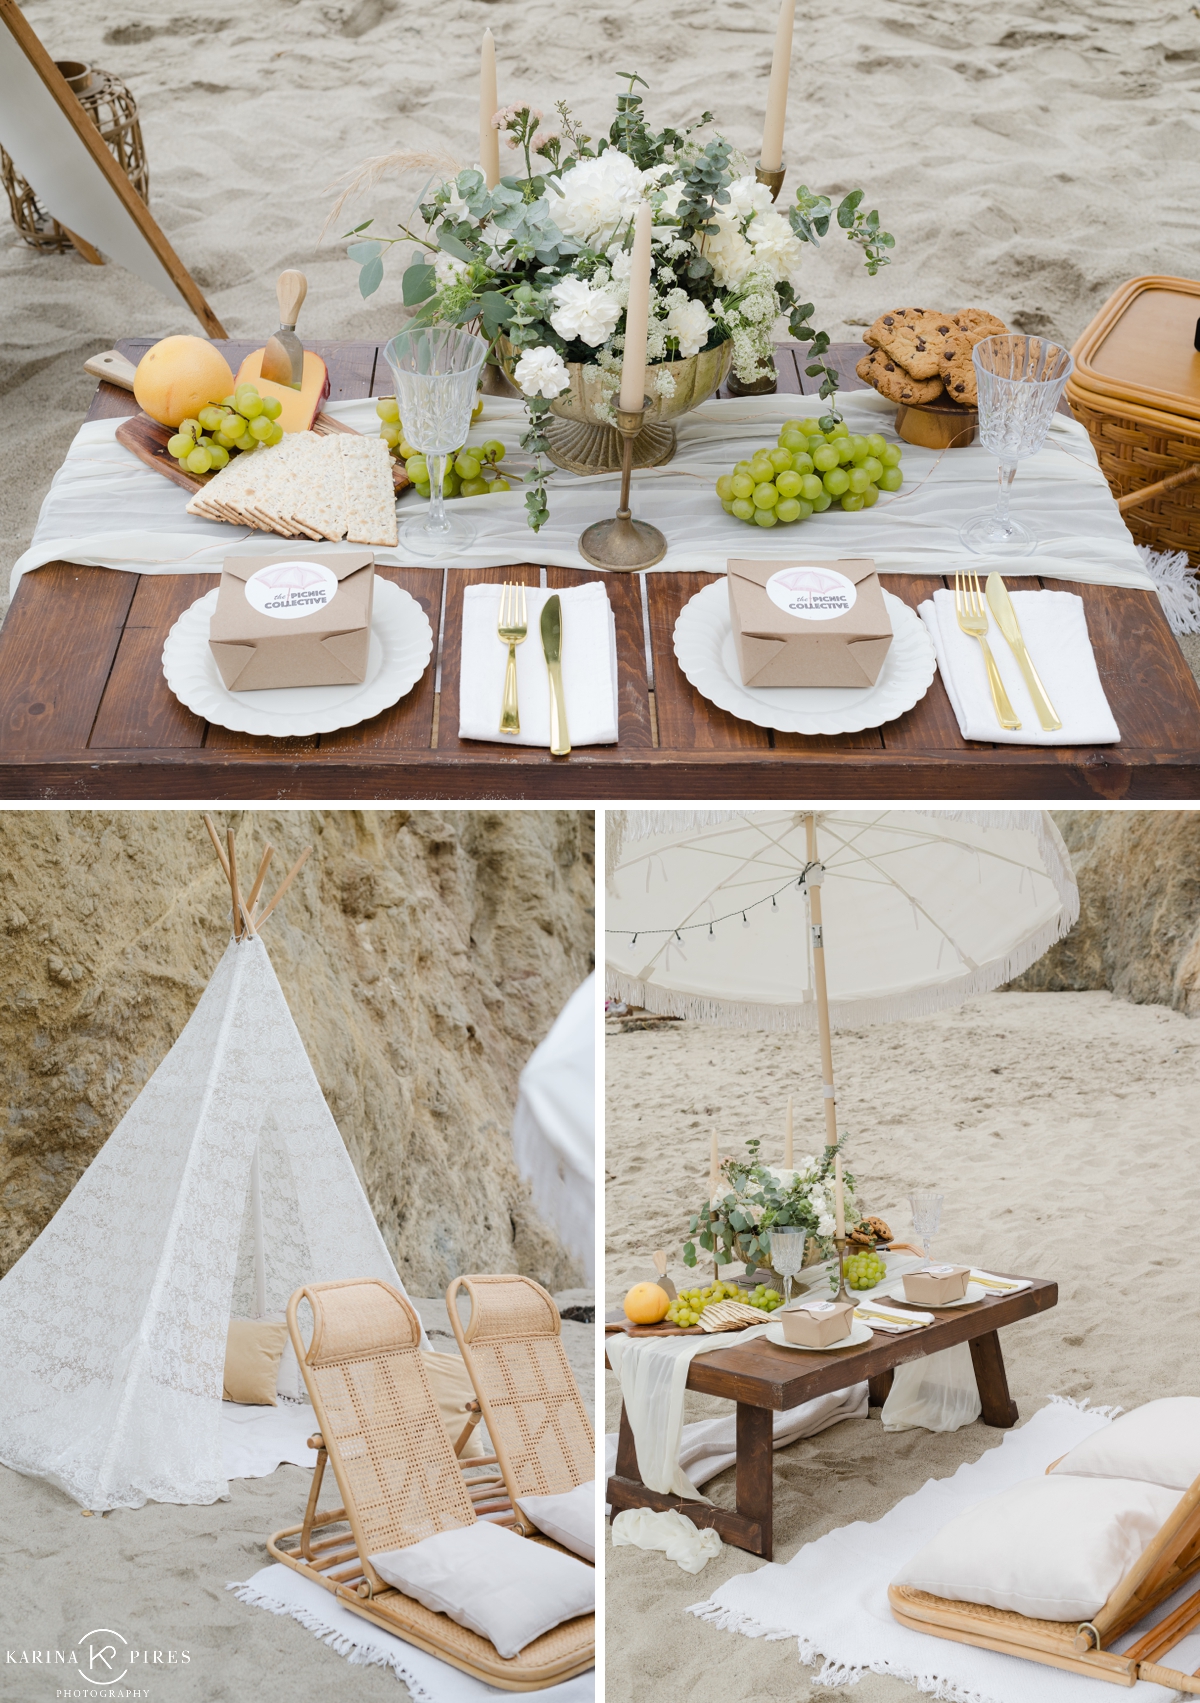 Surprise proposal setup on the beach by The Picnic Collective